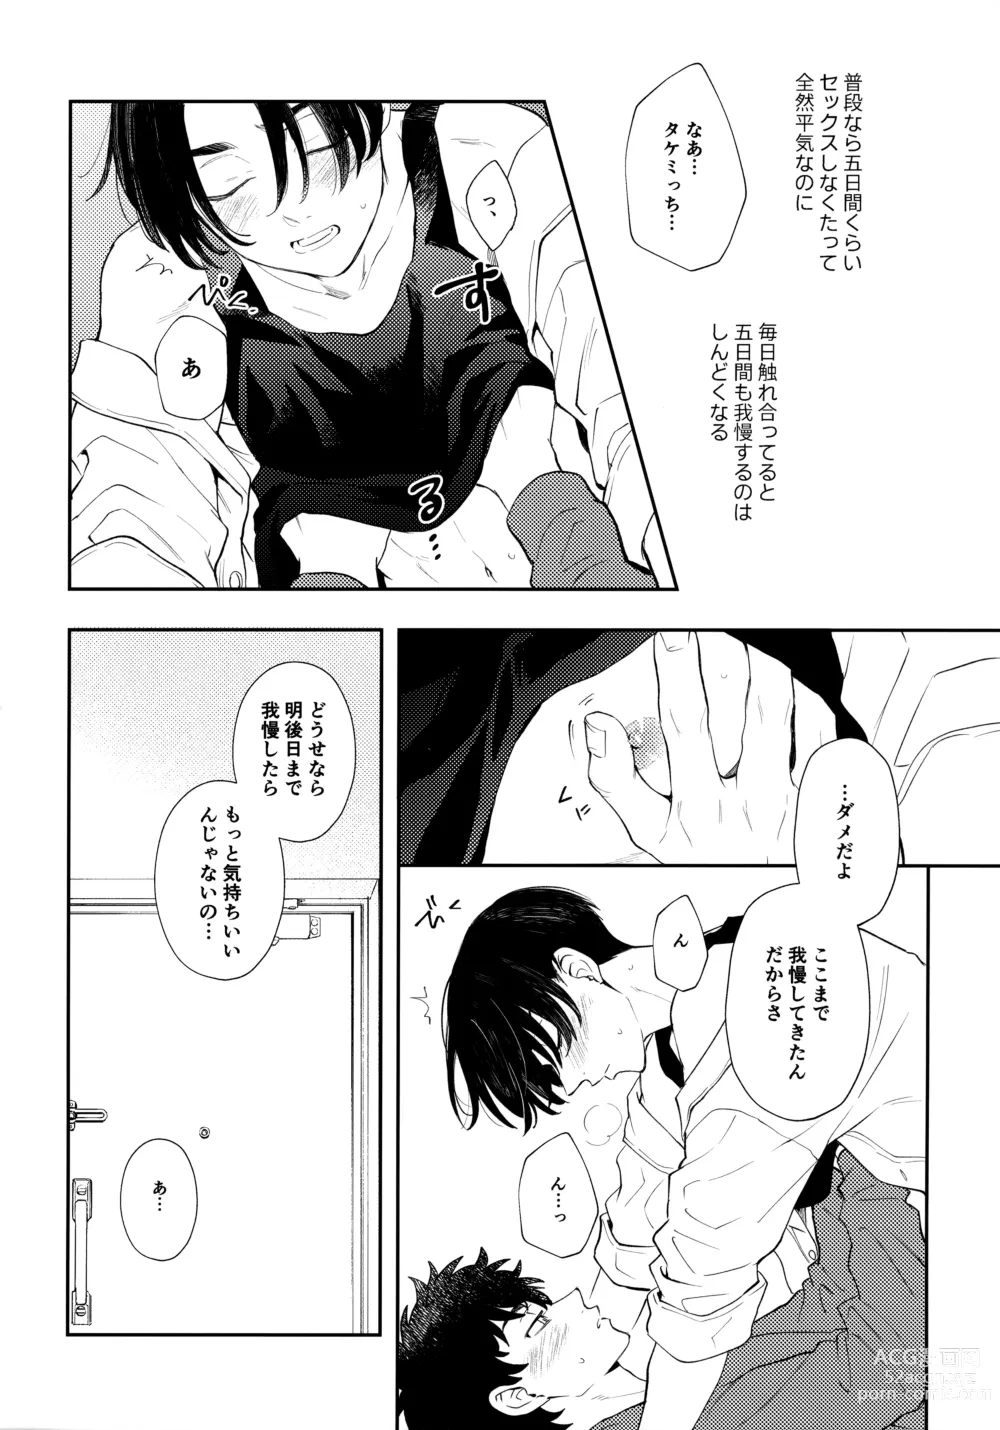 Page 21 of doujinshi Count 5